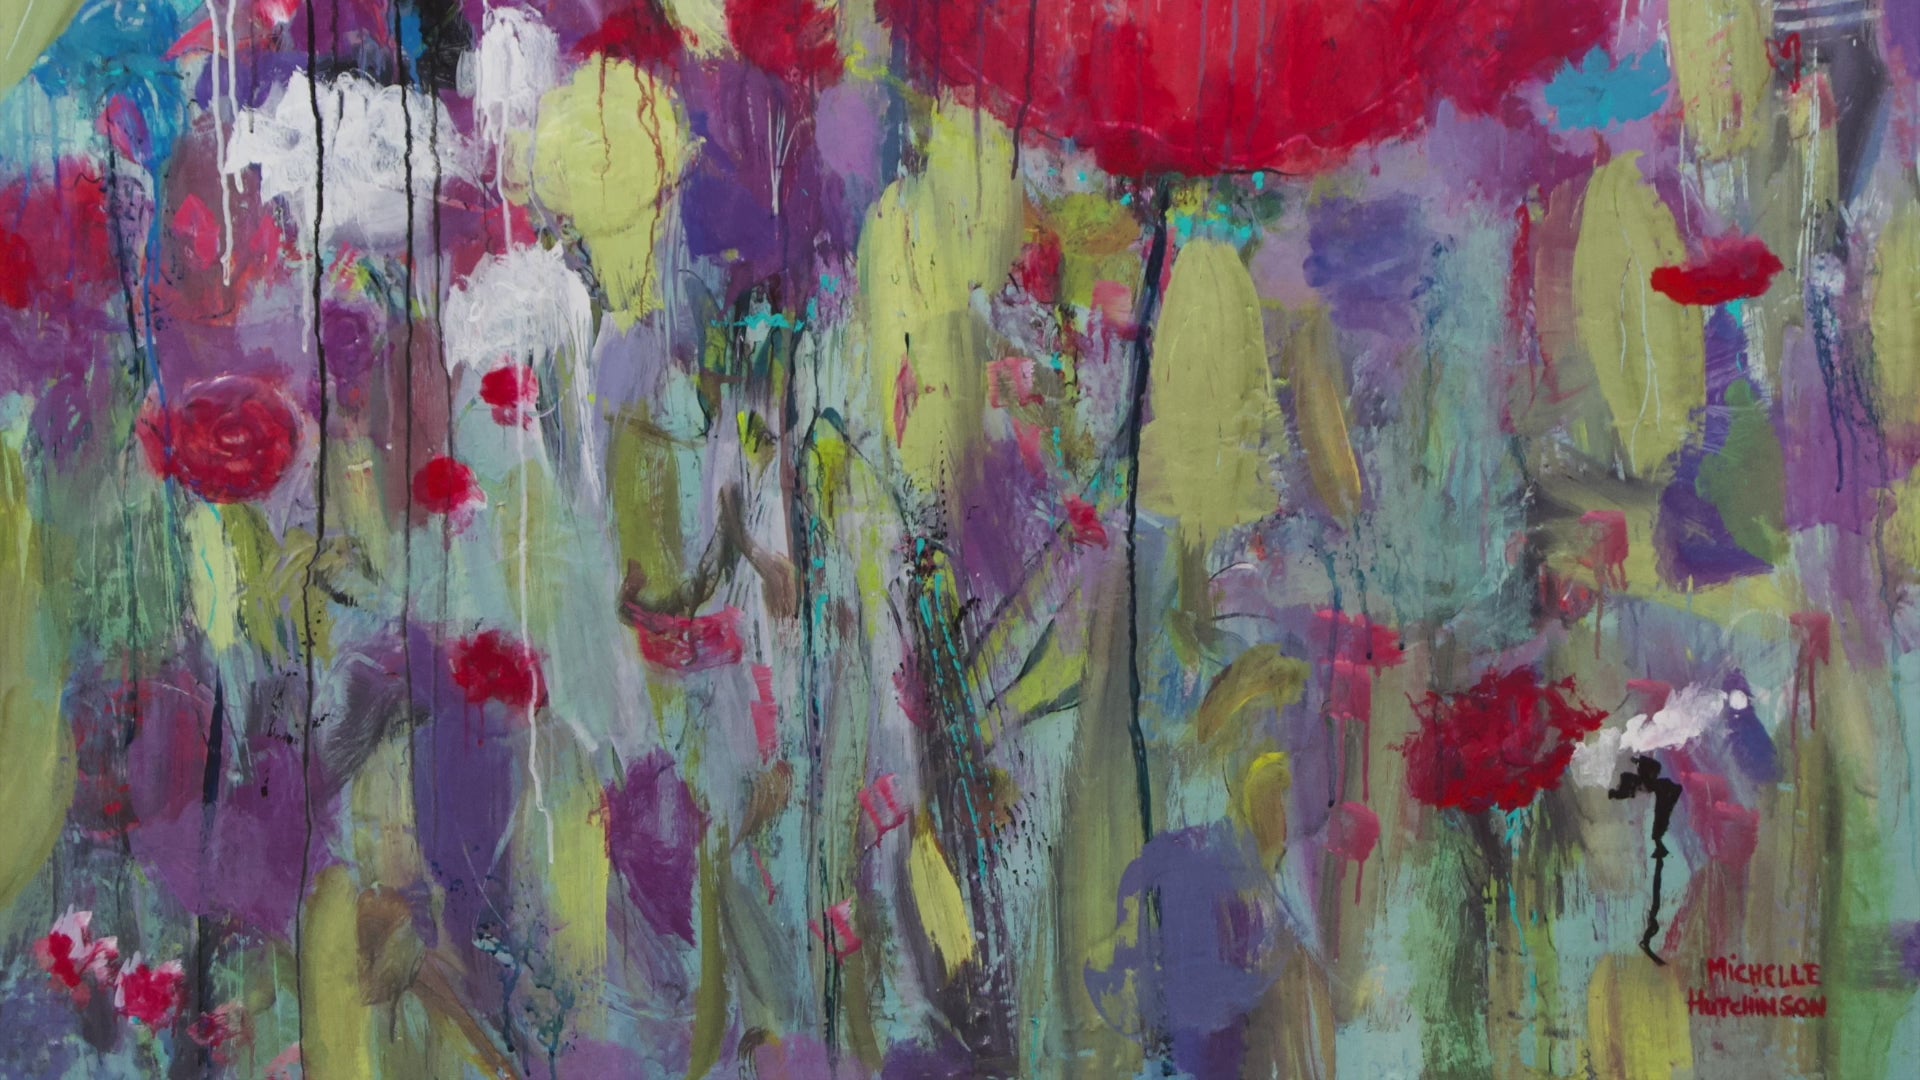 This original painting spotlights a rising red blossom against a garden of teals and purples.